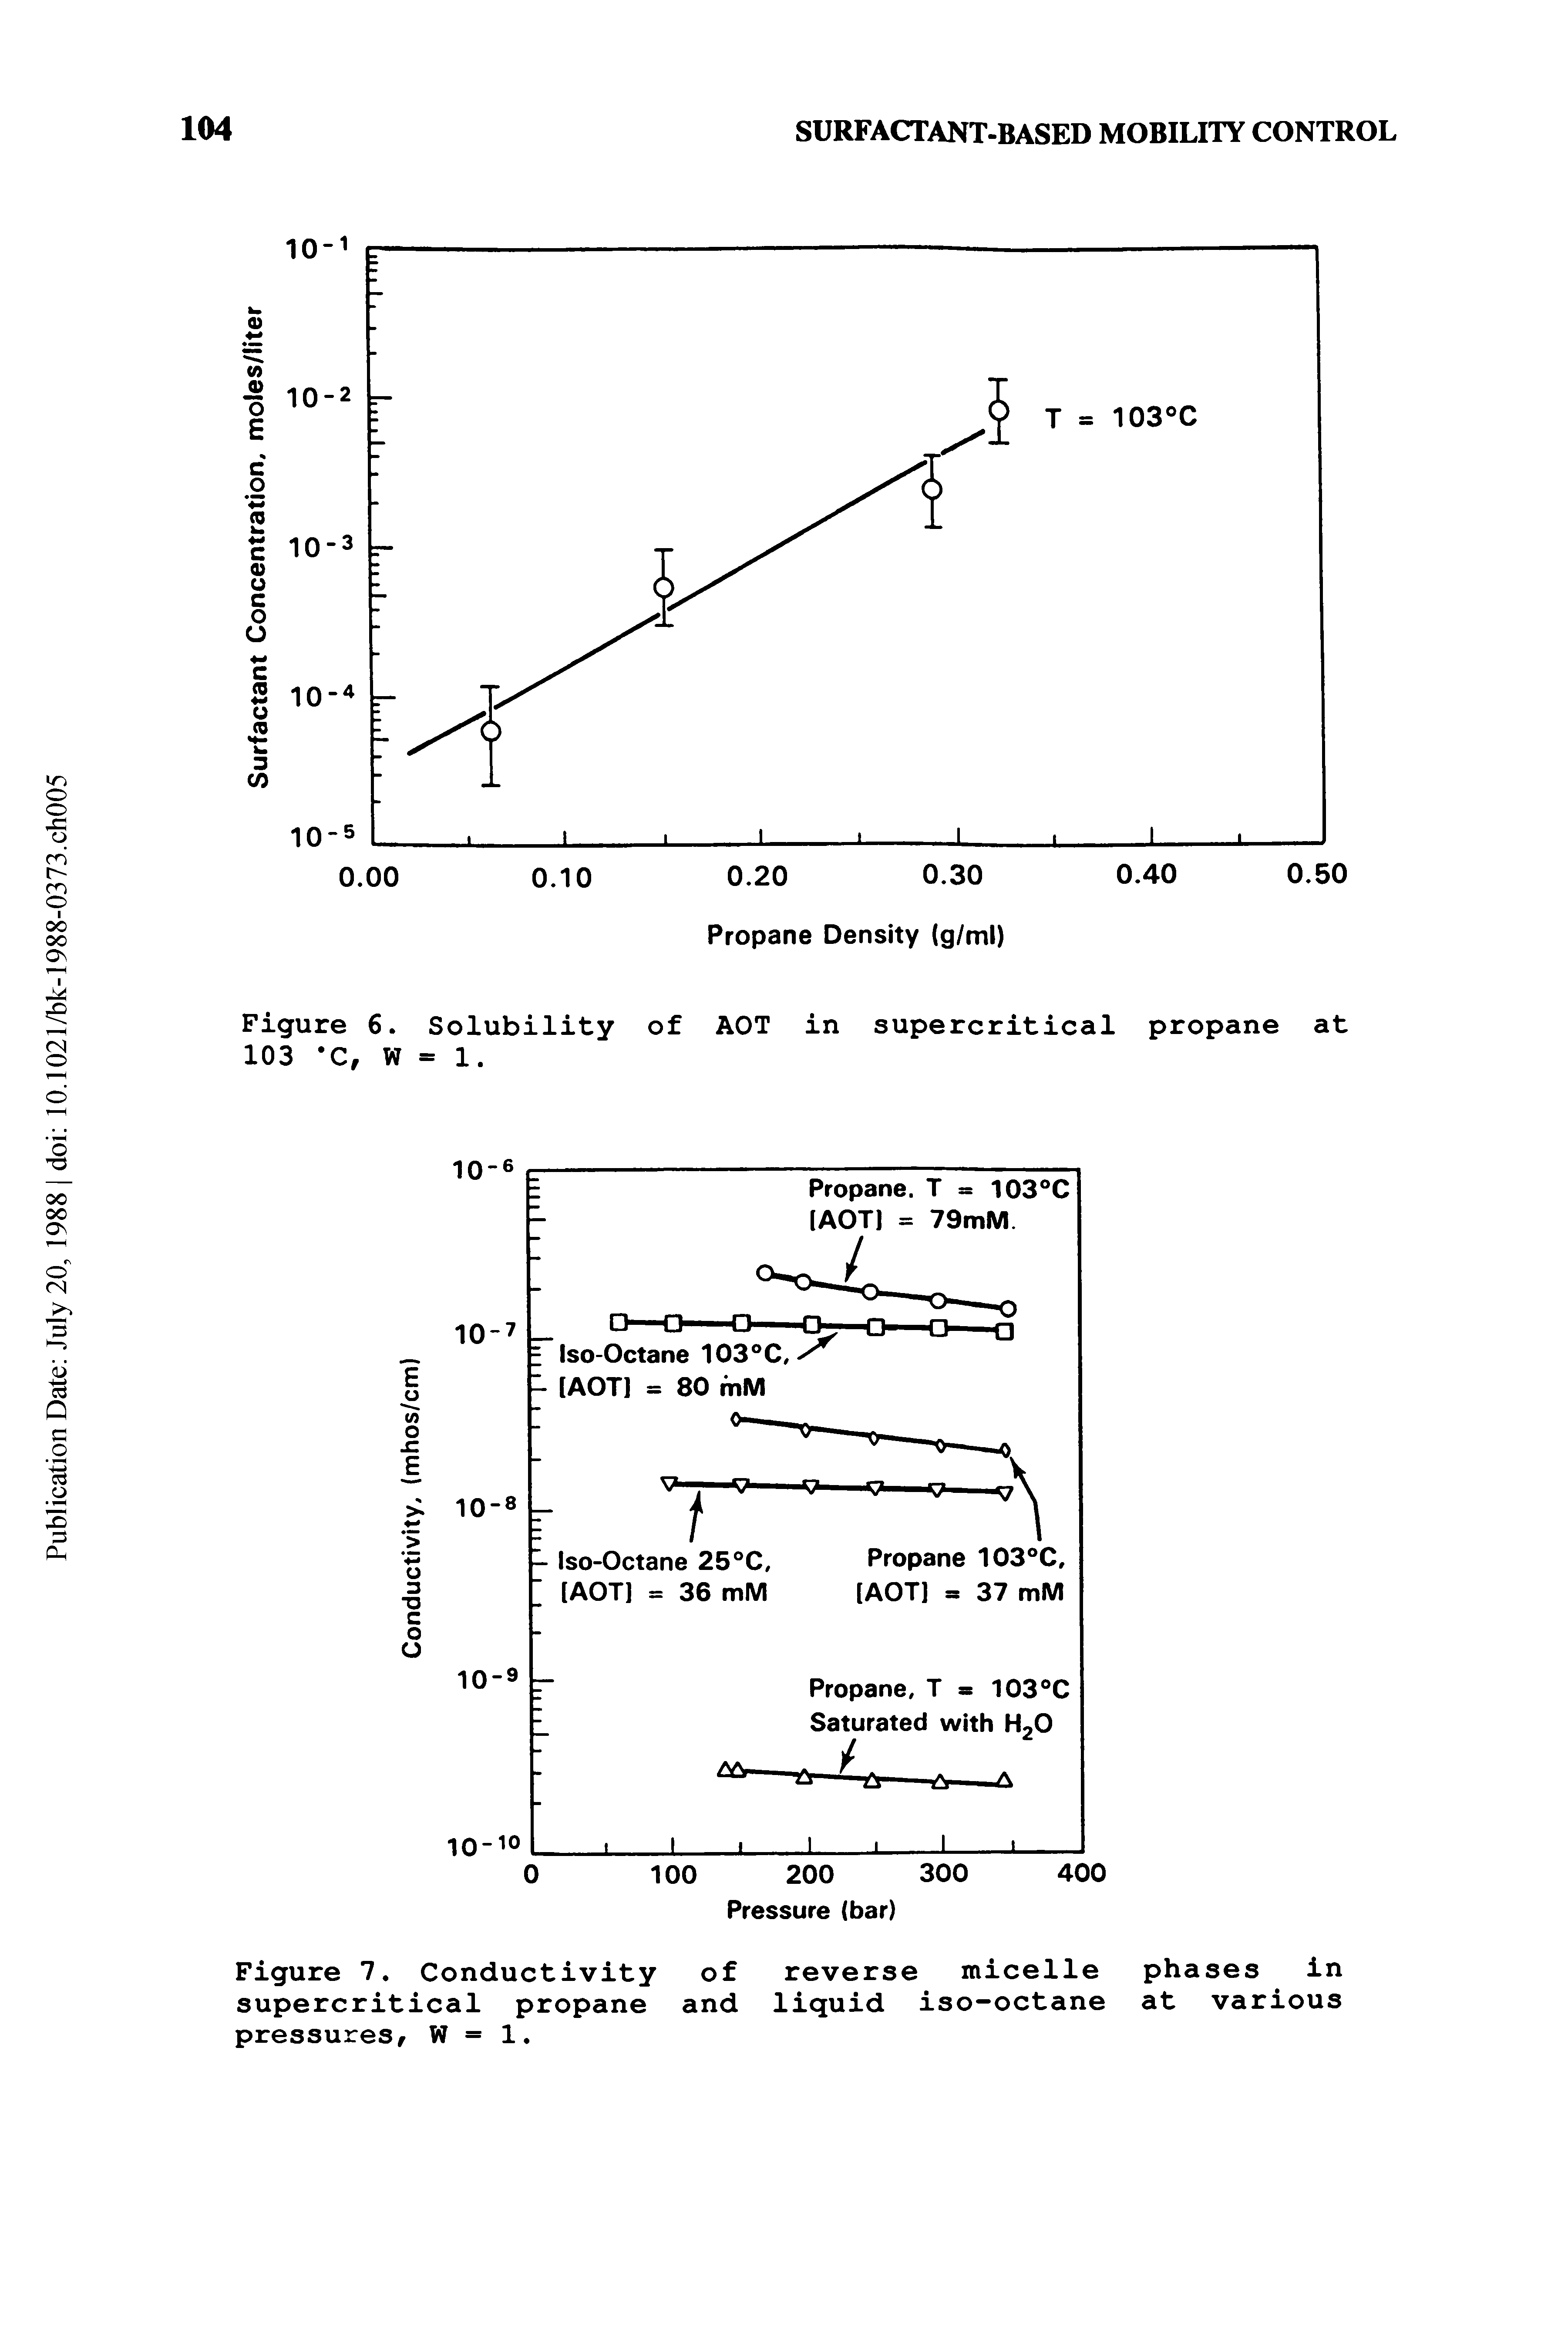 Figure 7. Conductivity of reverse micelle phases in supercritical propane and liquid iso-octane at various pressures, W = 1.